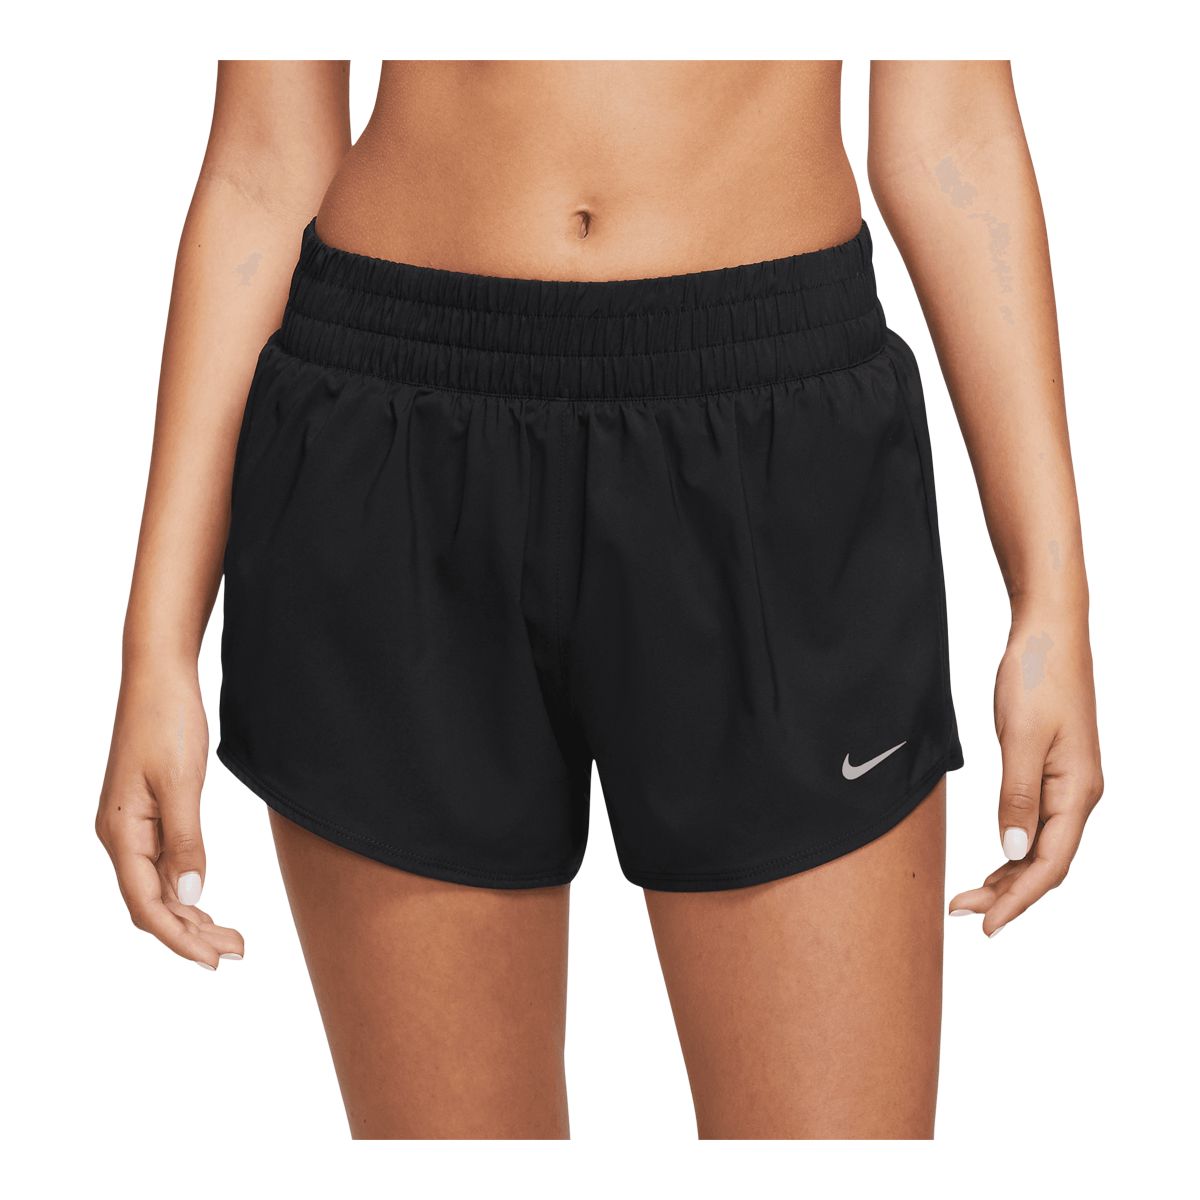 Nike Women's One Dri-FIT Mid-Rise 3 Inch BR Shorts